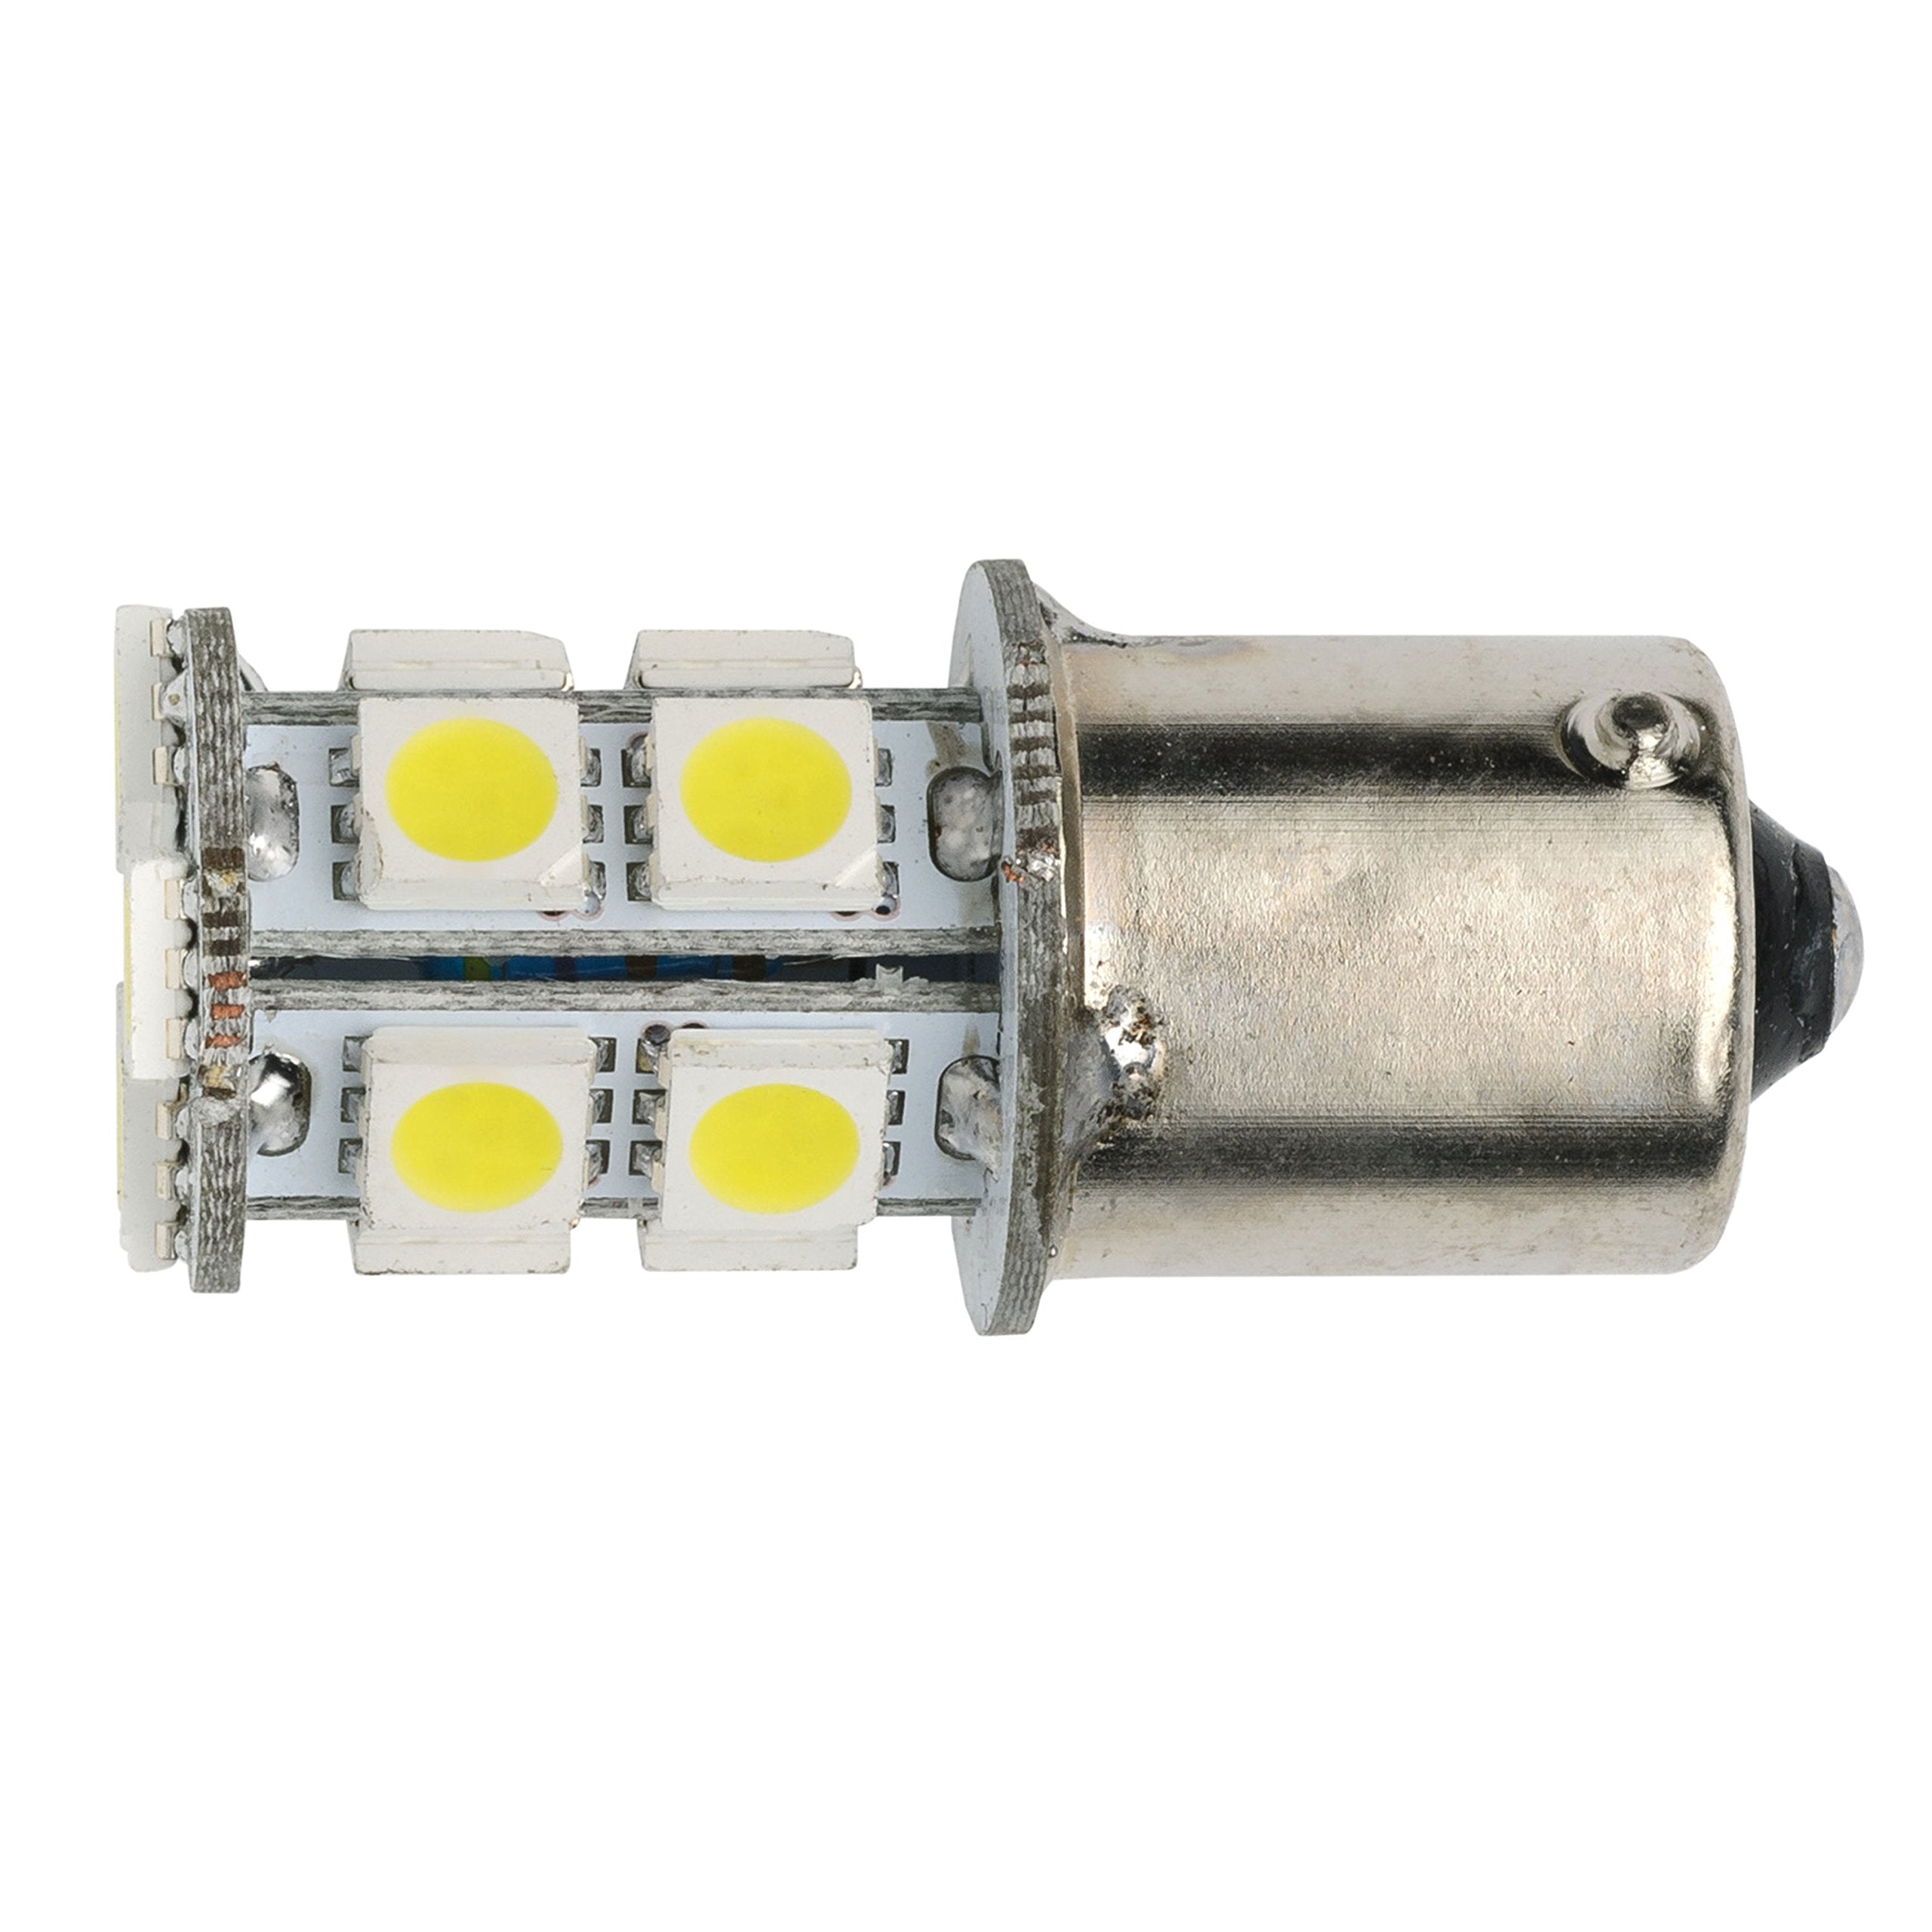 AP Products 016-7811156 Deluxe Socket Style LED Bulb #1156